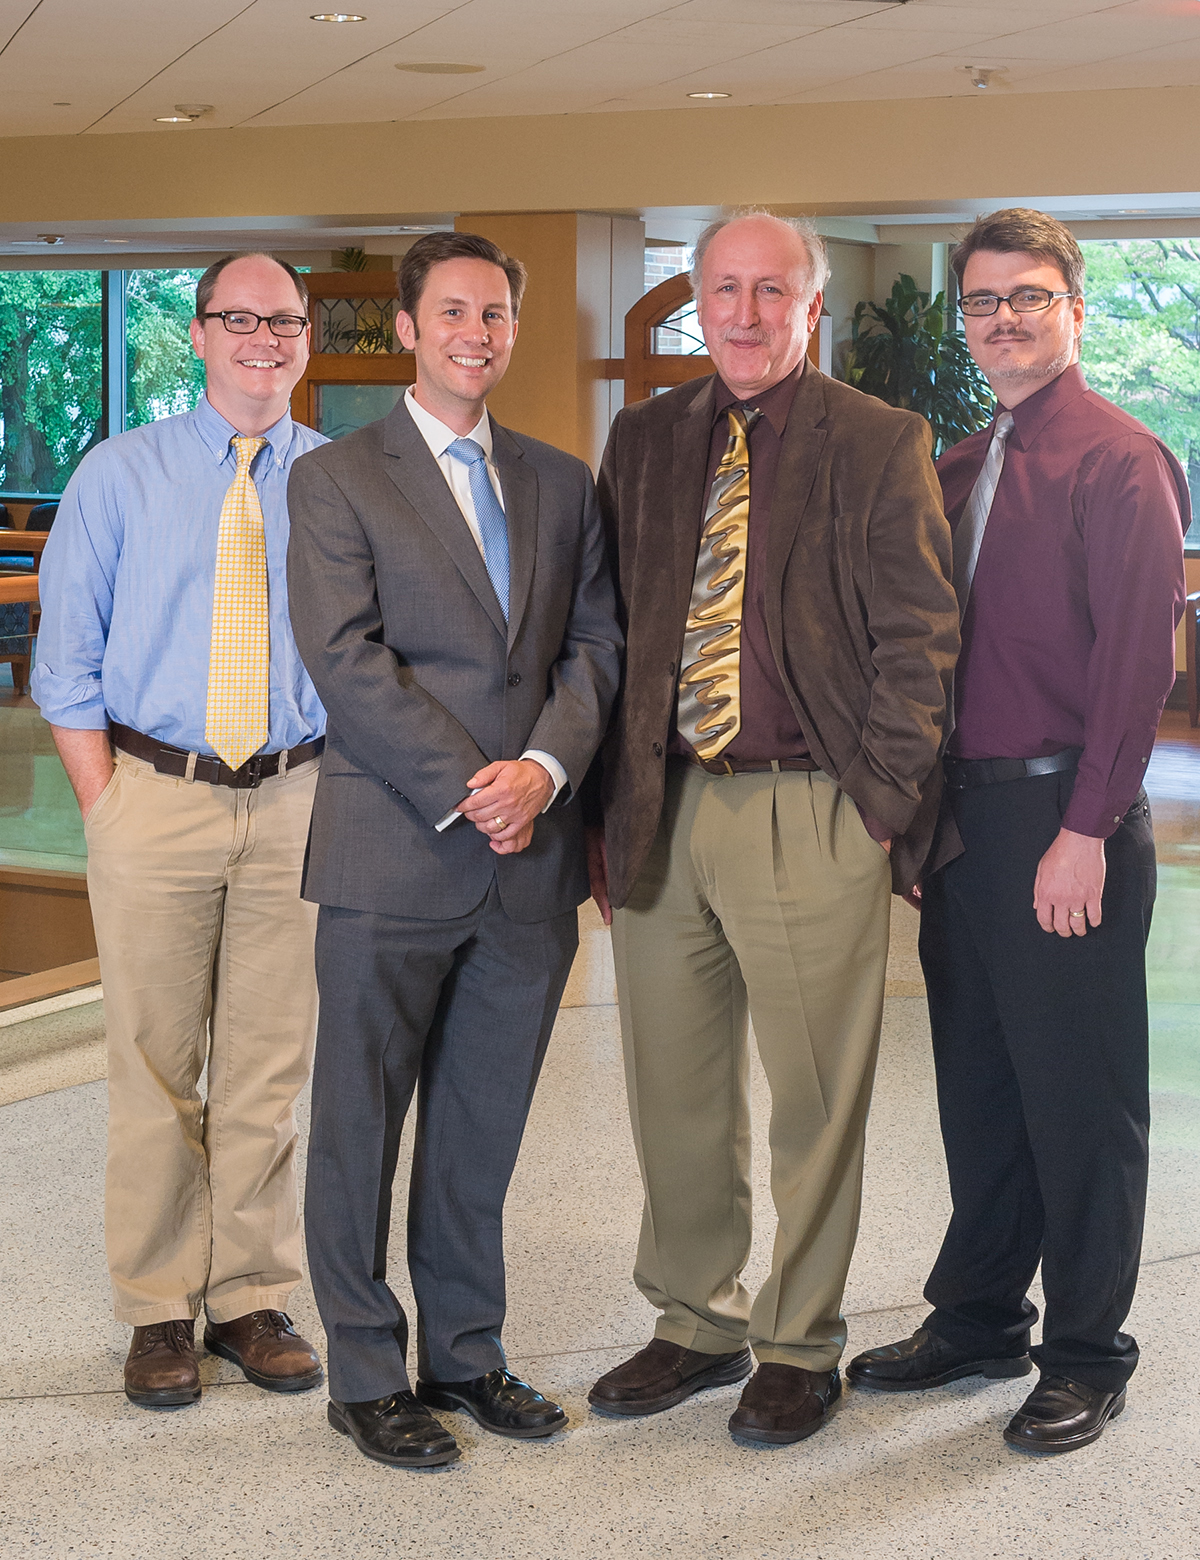 Peter A. Boling, Alan W. Dow, III, Joel D. Browning, and Christopher L. Stephens